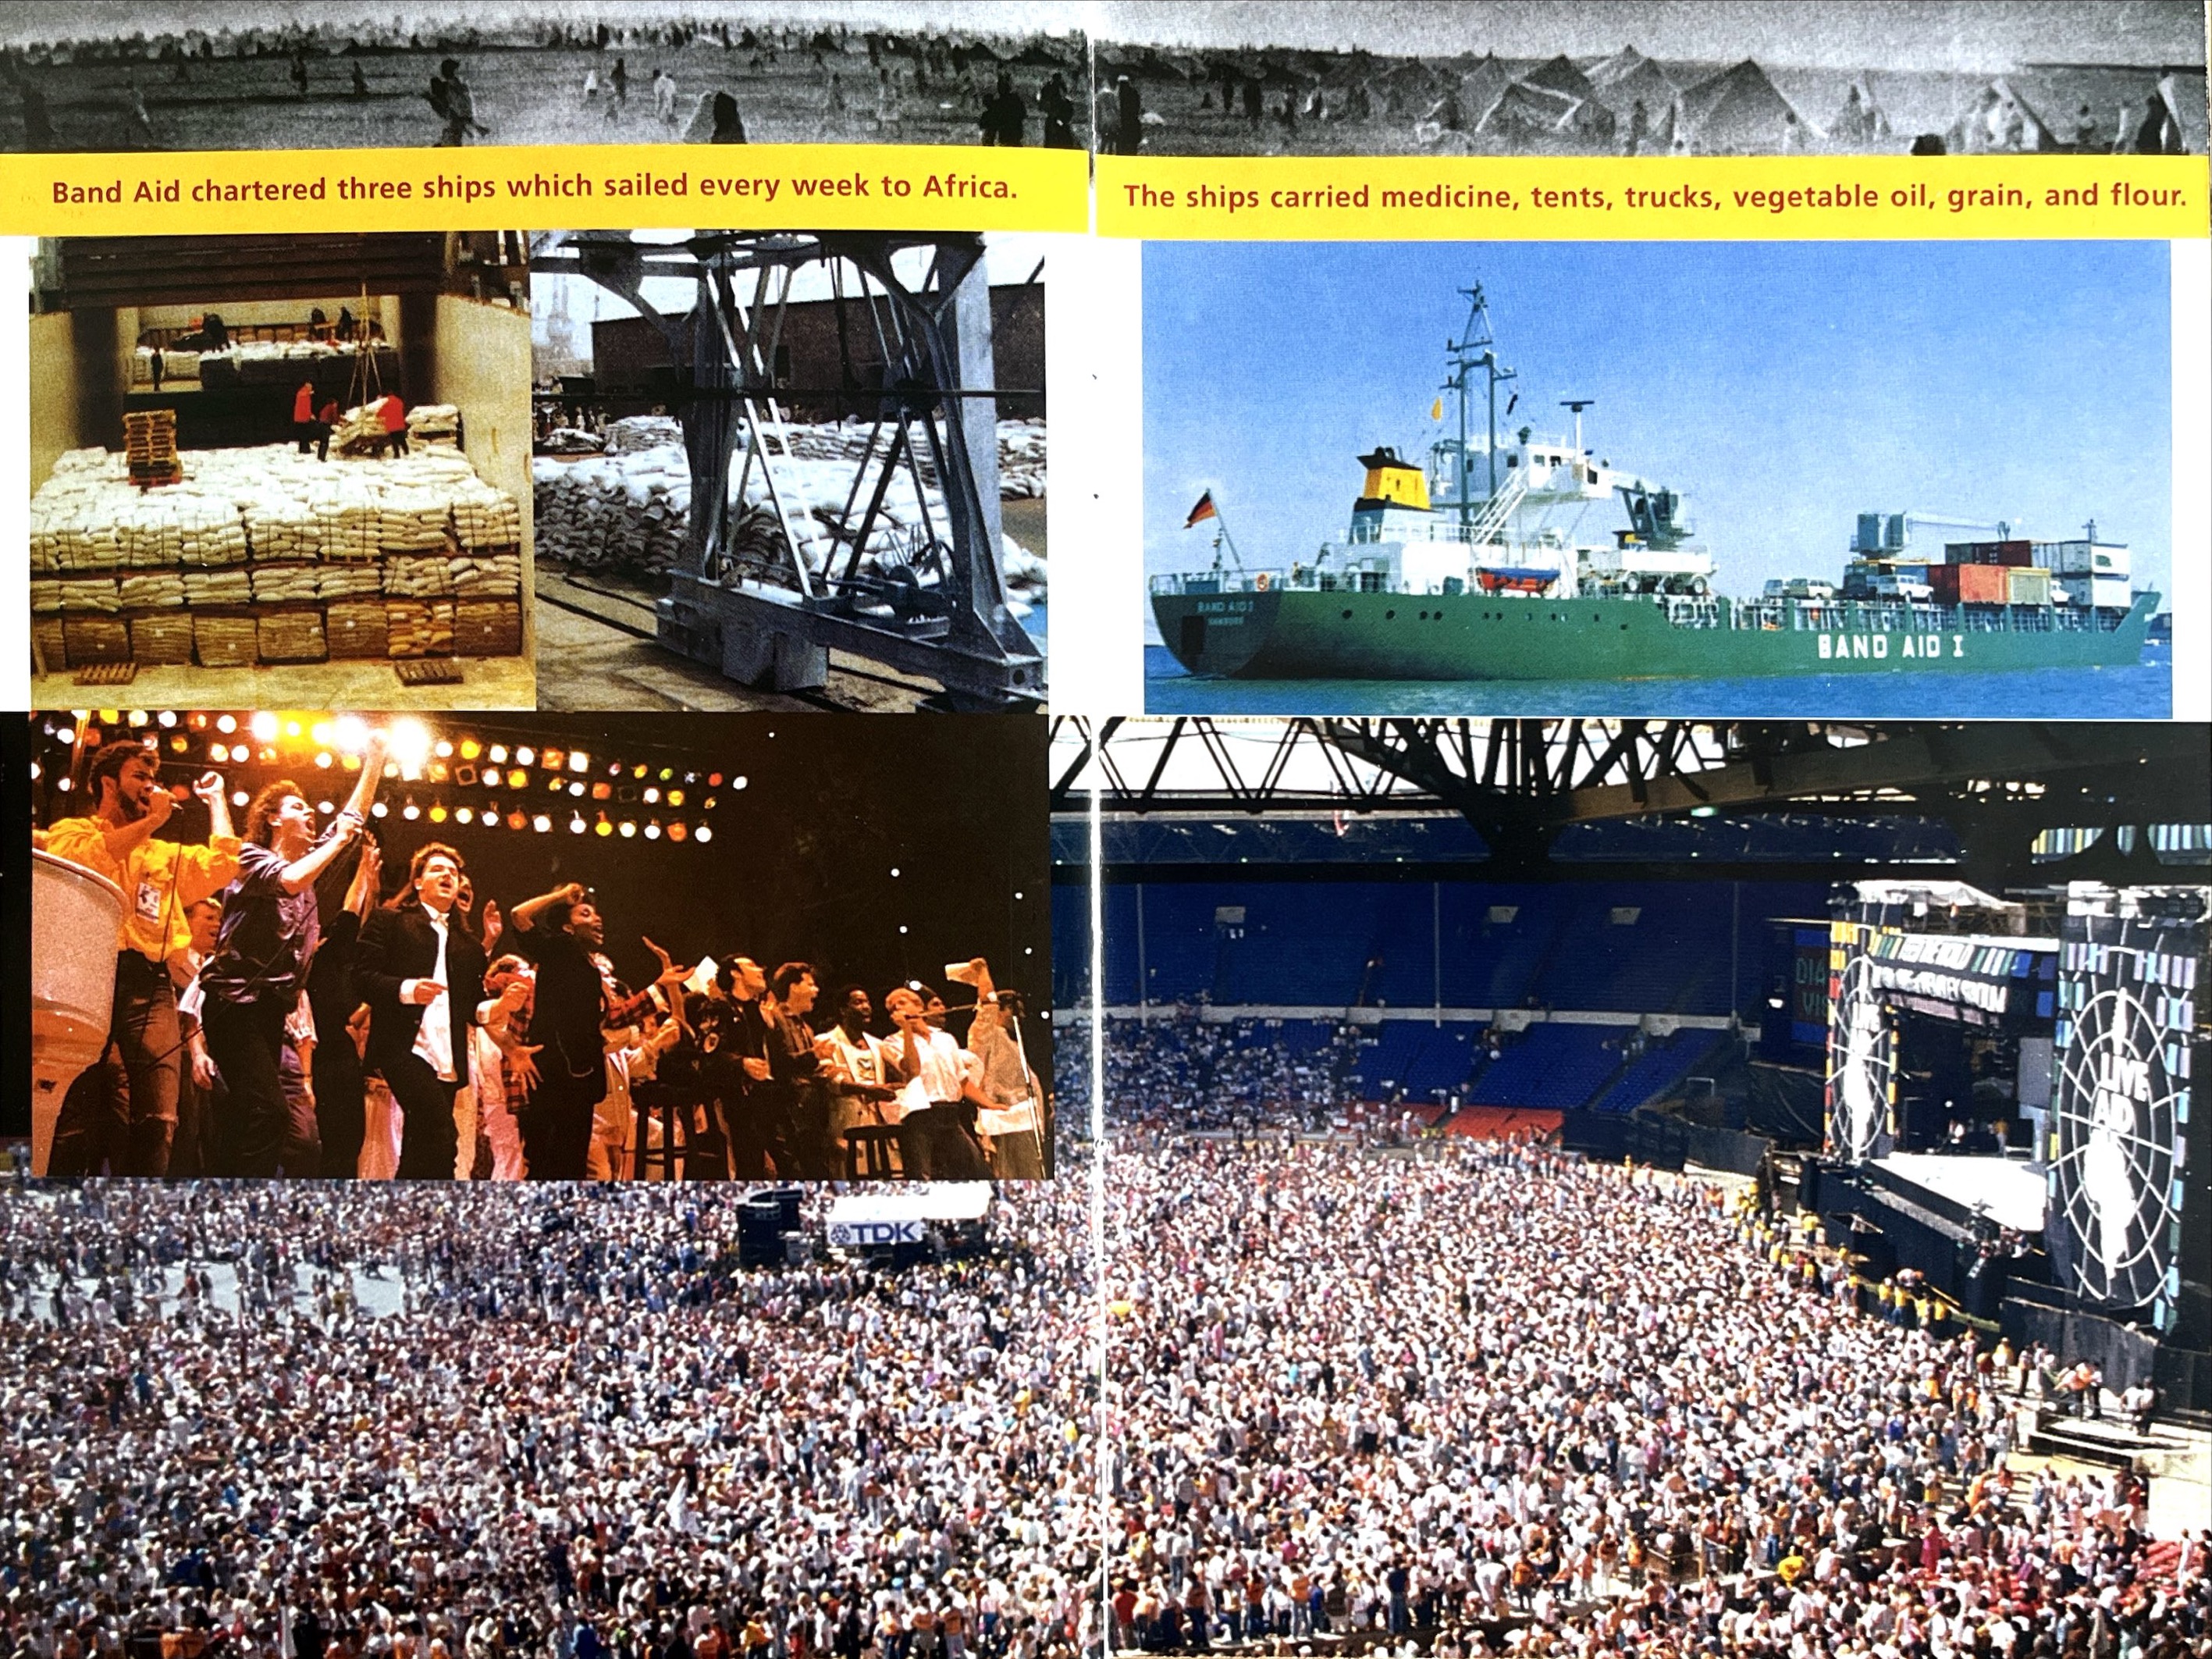 Double-page spread from the Live Aid booklet. A yellow strip across the top has text that says Band Aid chartered three ships which sailed every week to Africa.
The ships carried medicine, tents, trucks, vegetable oil, grain, and flour. Below this is a photo of one of the ships and 2 photos of the aid packages on board. Below those images is a photo of the group finale at the end of the Wembley concert, led by Bob Geldof and Bono, and a large photo spanning both pages that shows the huge crowd in Wembley, with the stage on the right.